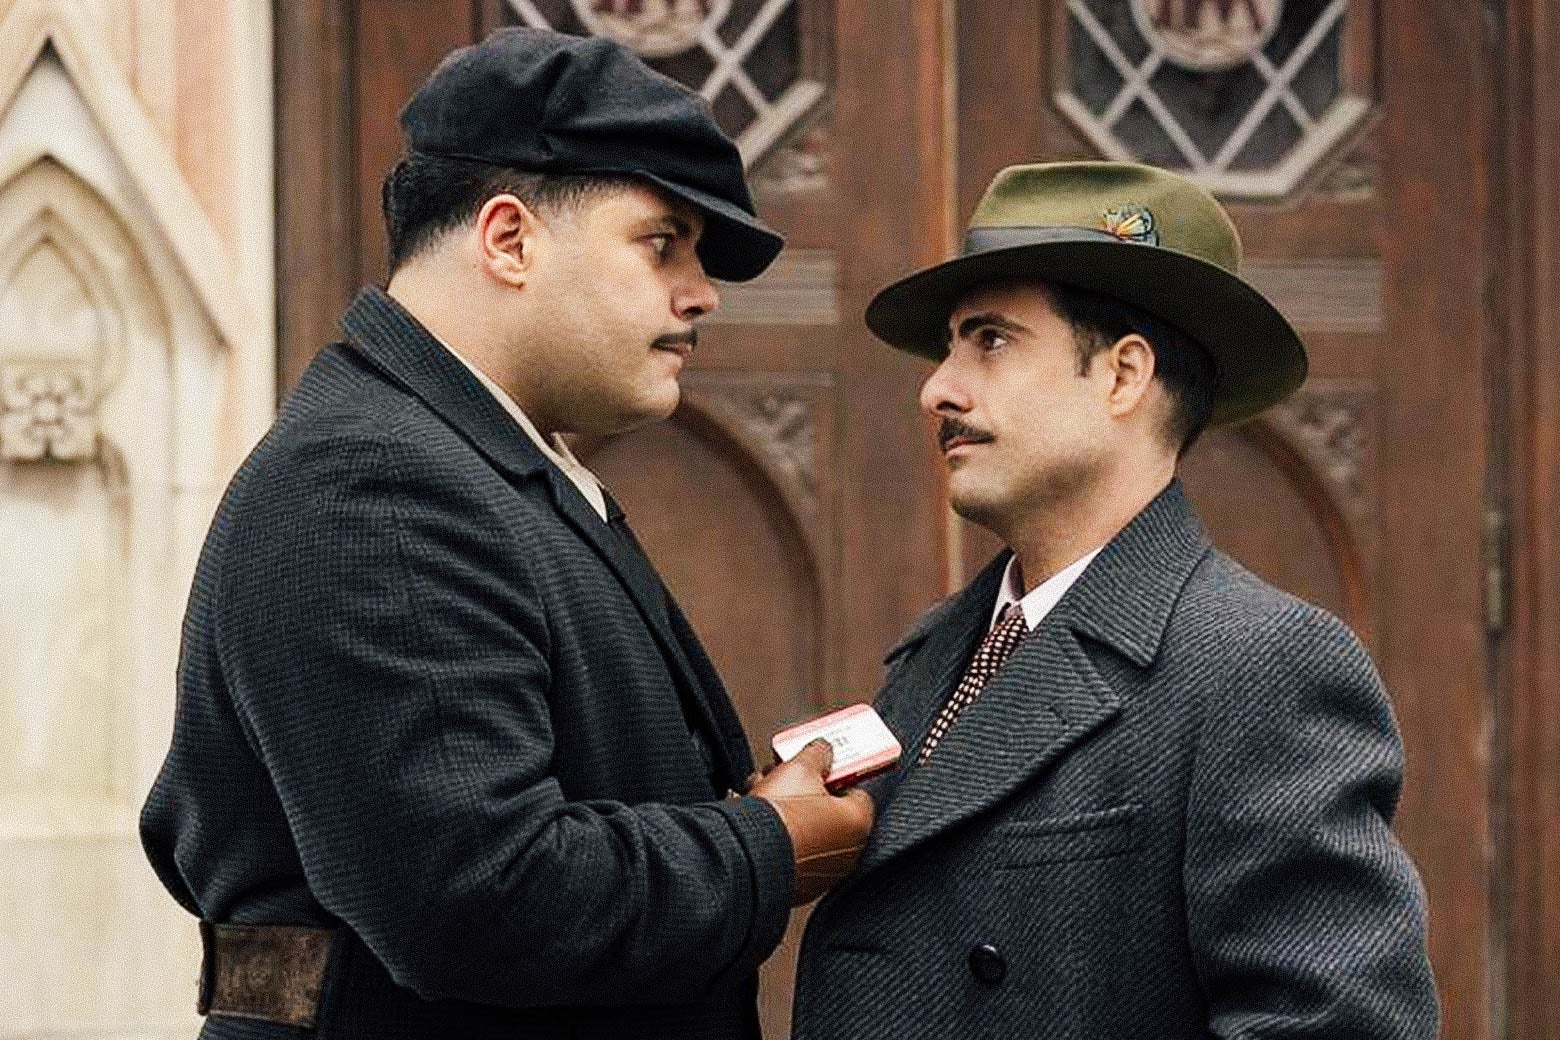 Two men with mustaches and hats stare at each other, one carrying a small tin, in a still from Fargo.